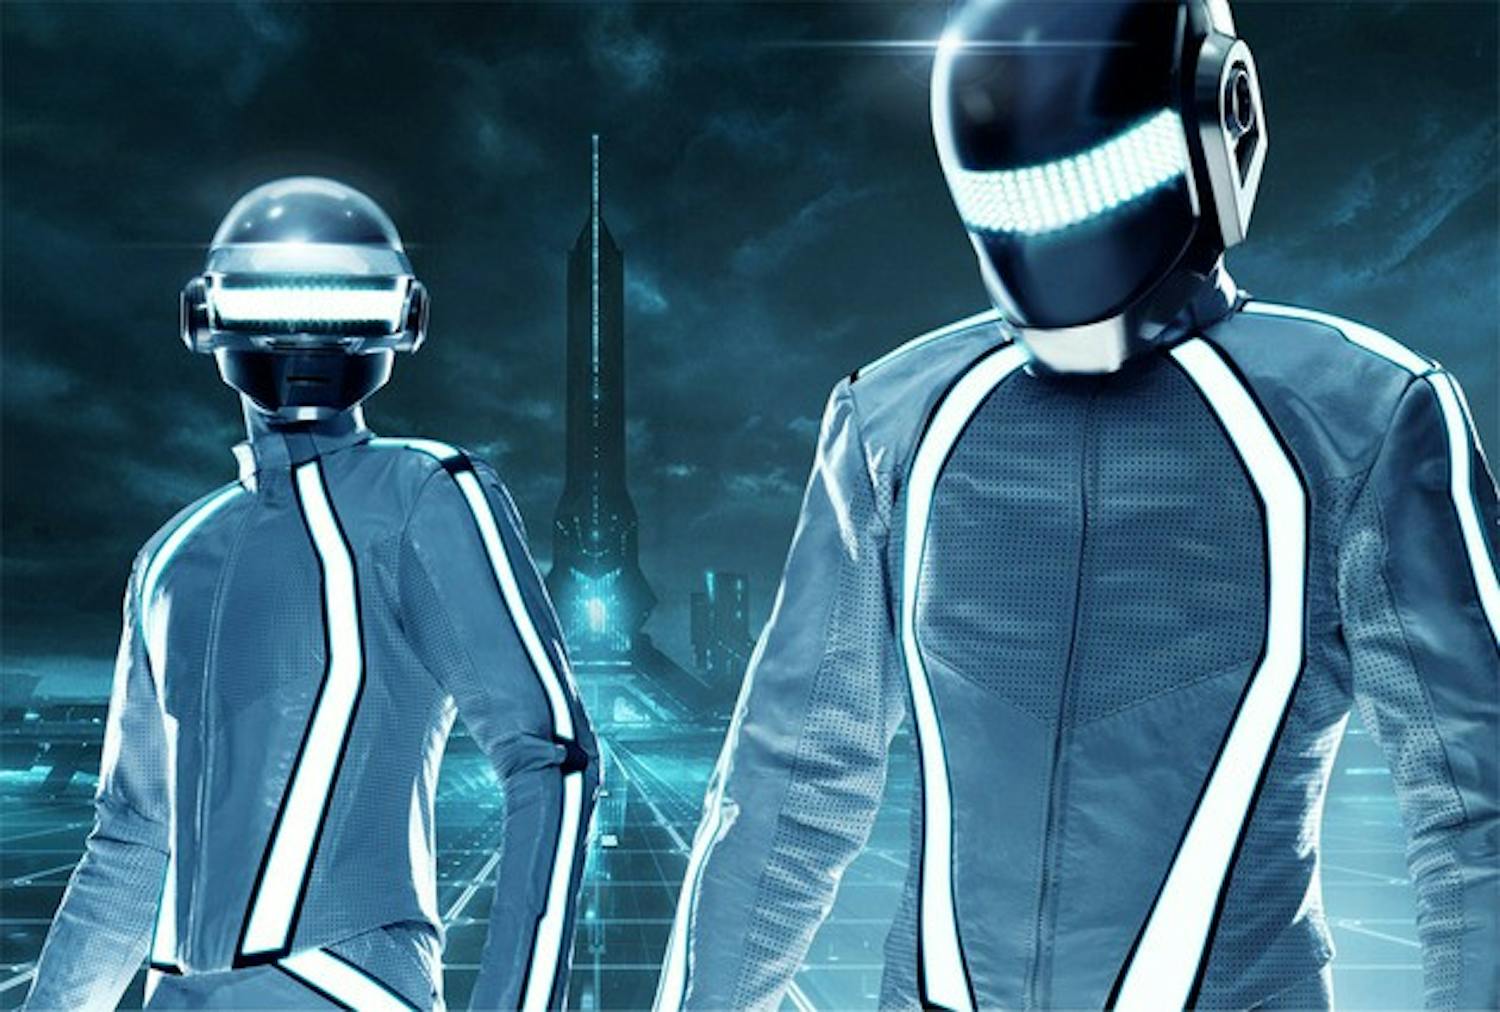 French electronic duo Daft Punk lent their club music credentials to the soundtrack of 